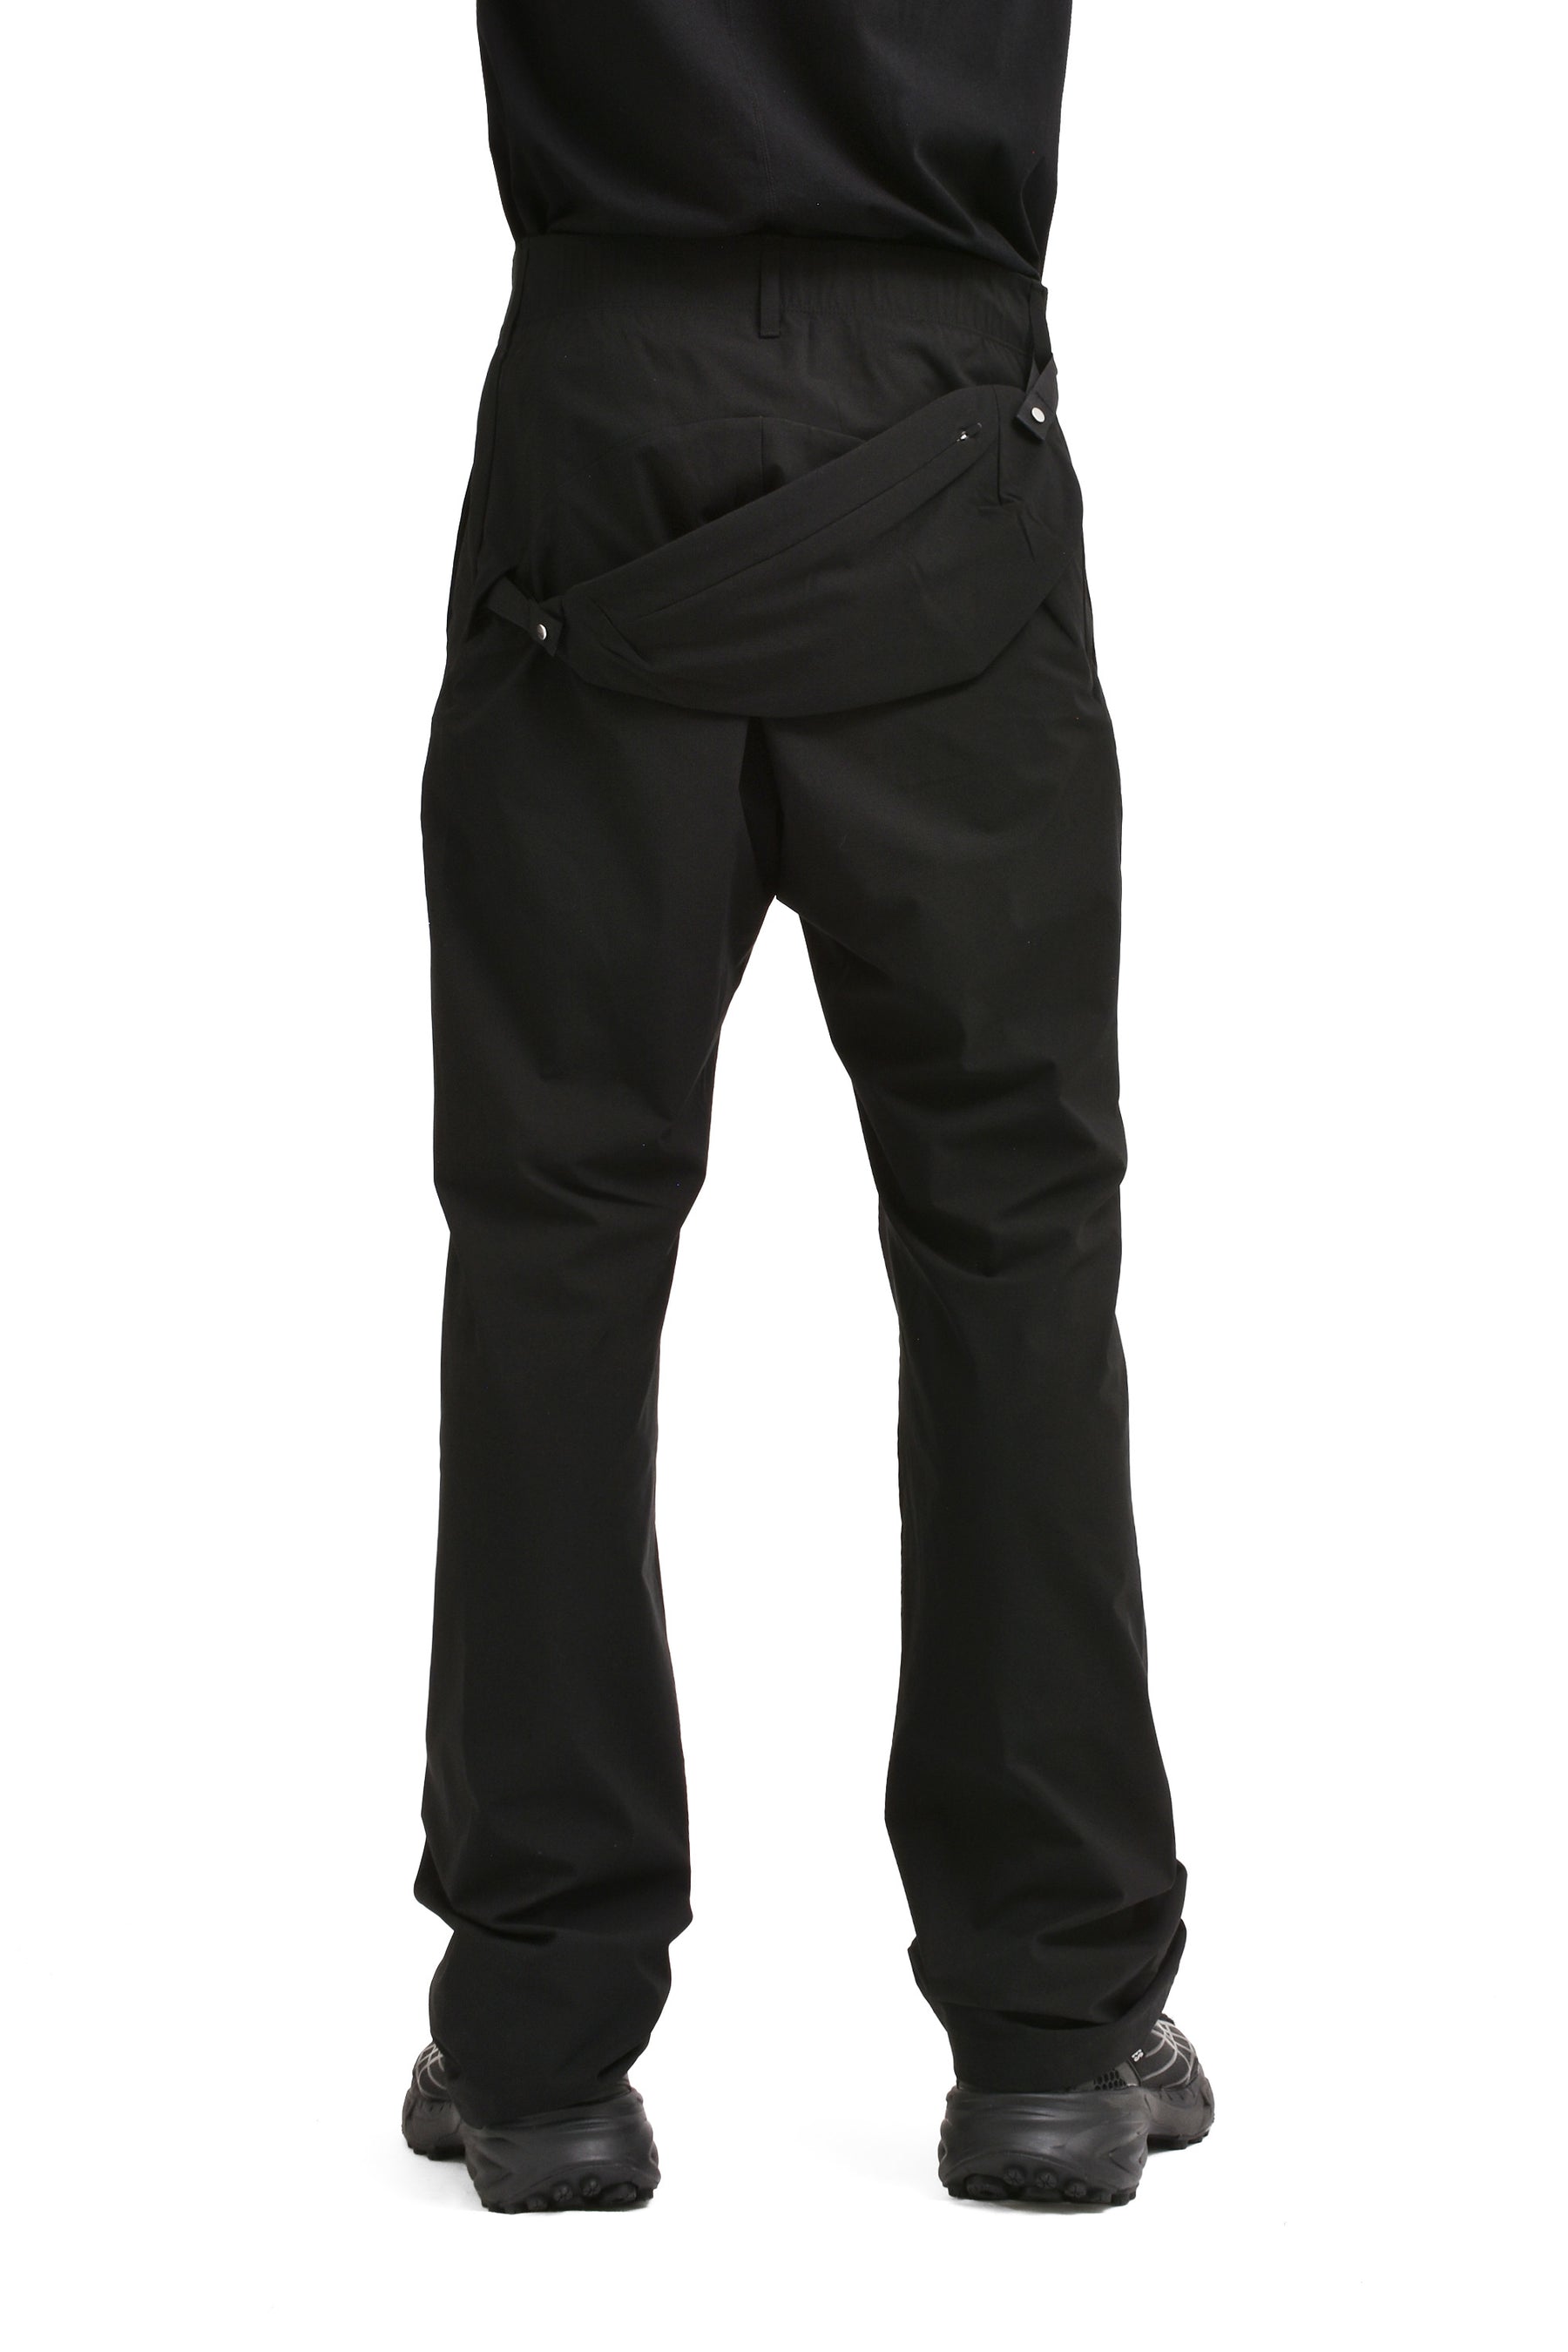 6.0 TECHNICAL PANTS RIGHT / BLK